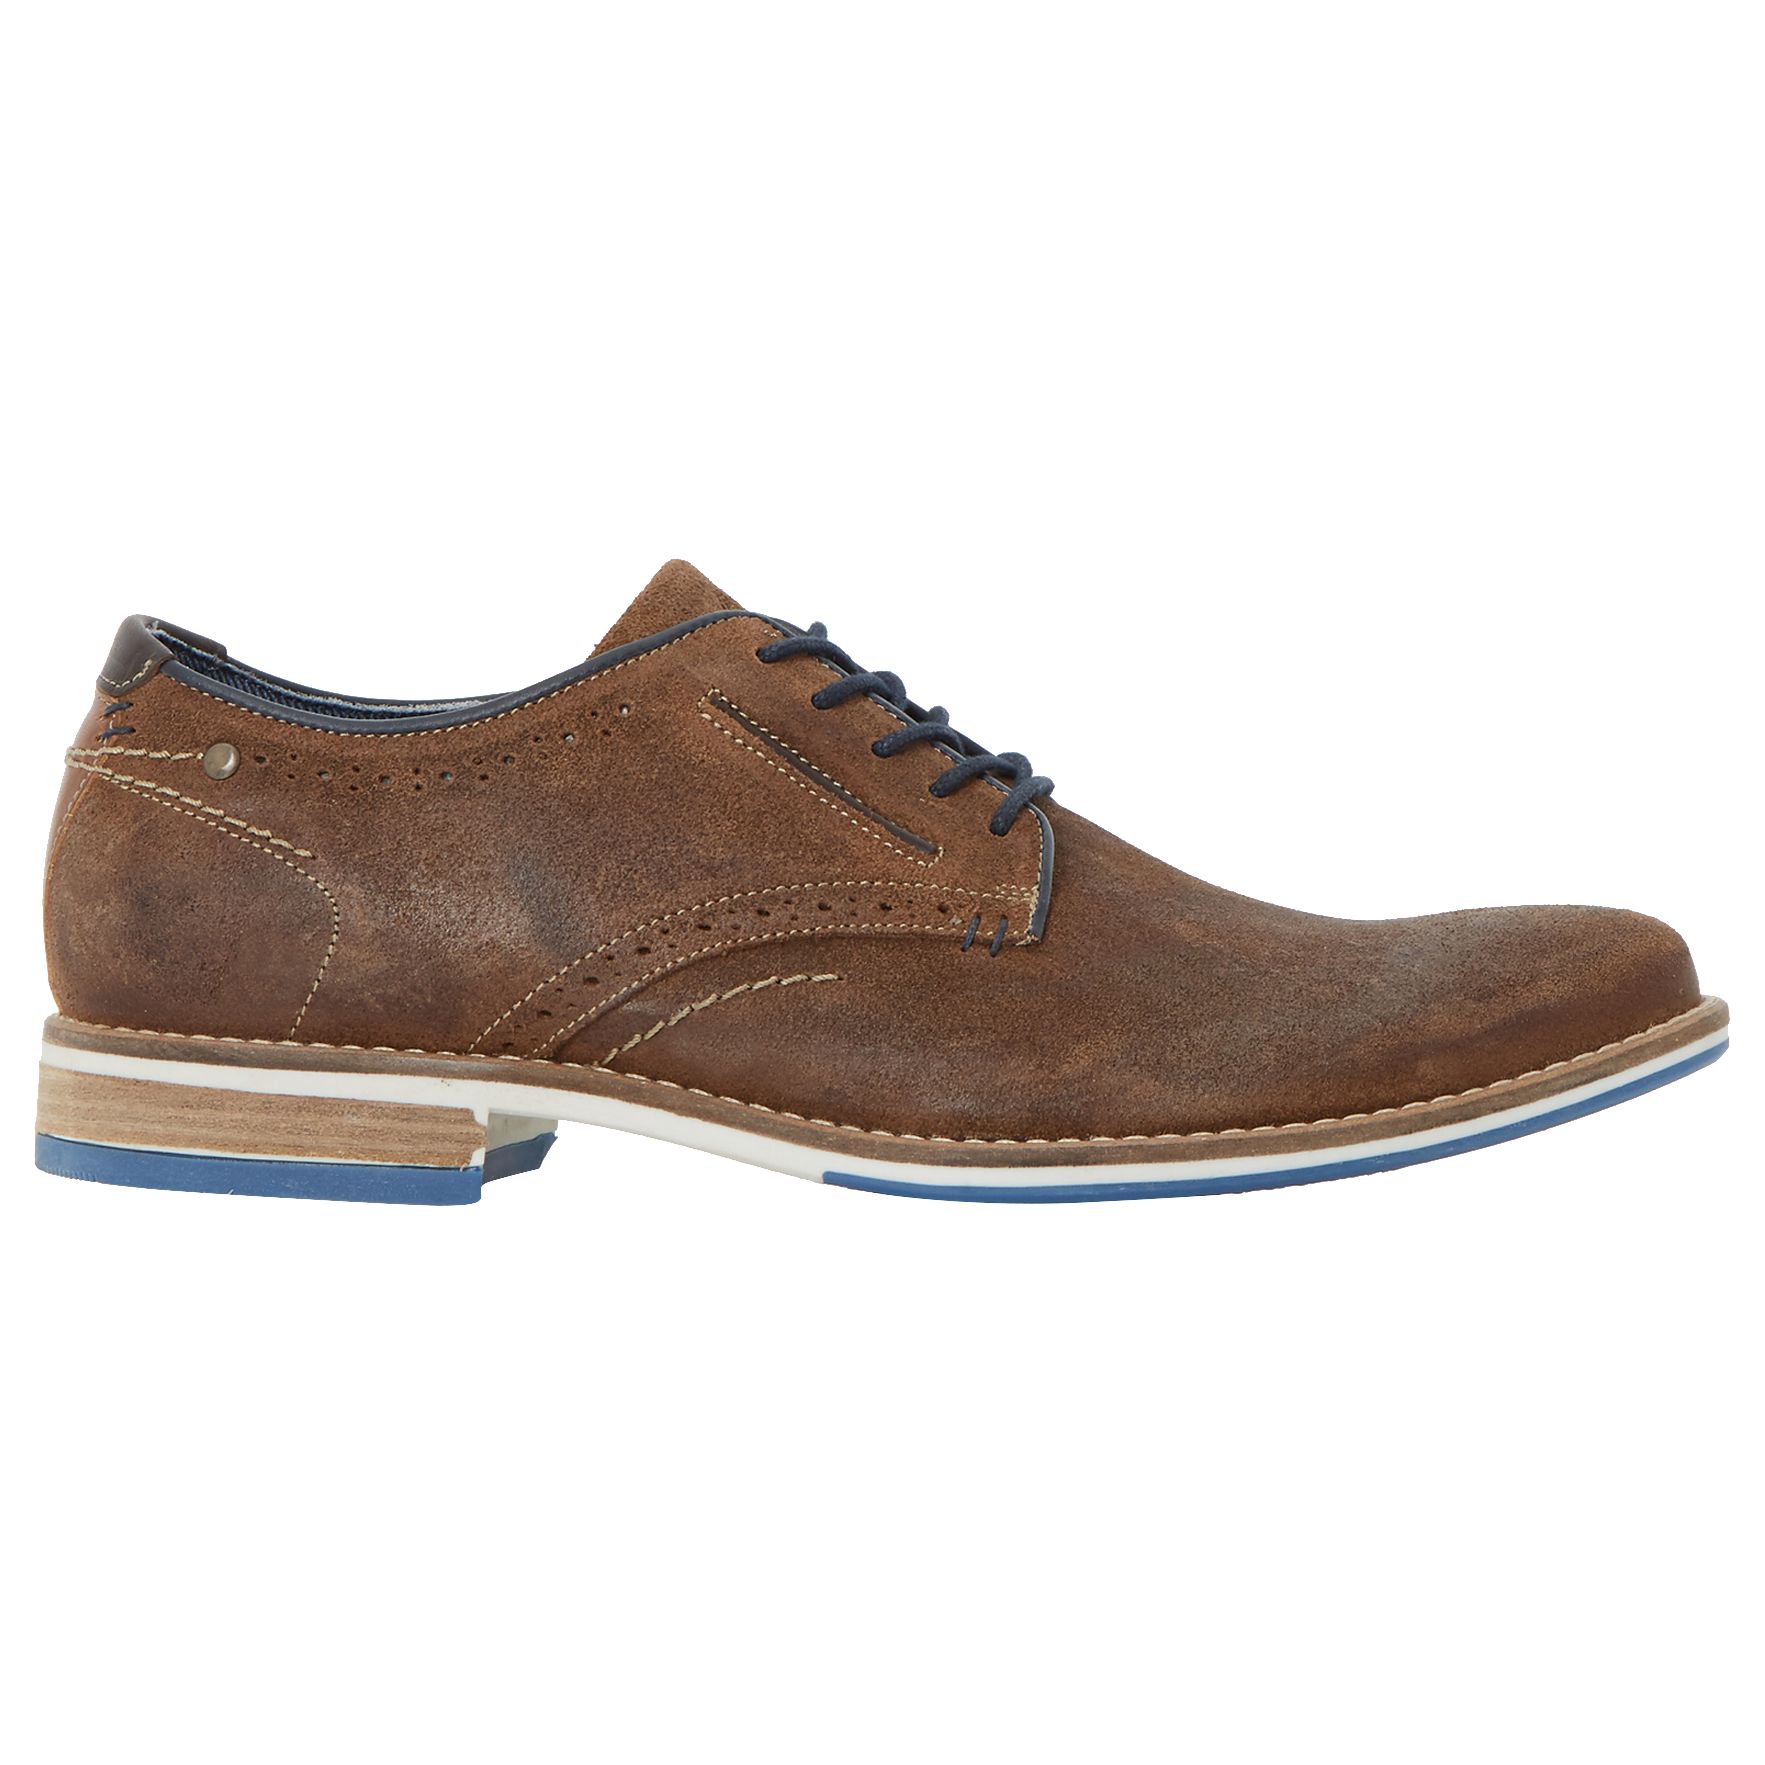 Dune Brewer Gibson Suede Shoes, Tan Suede, 12